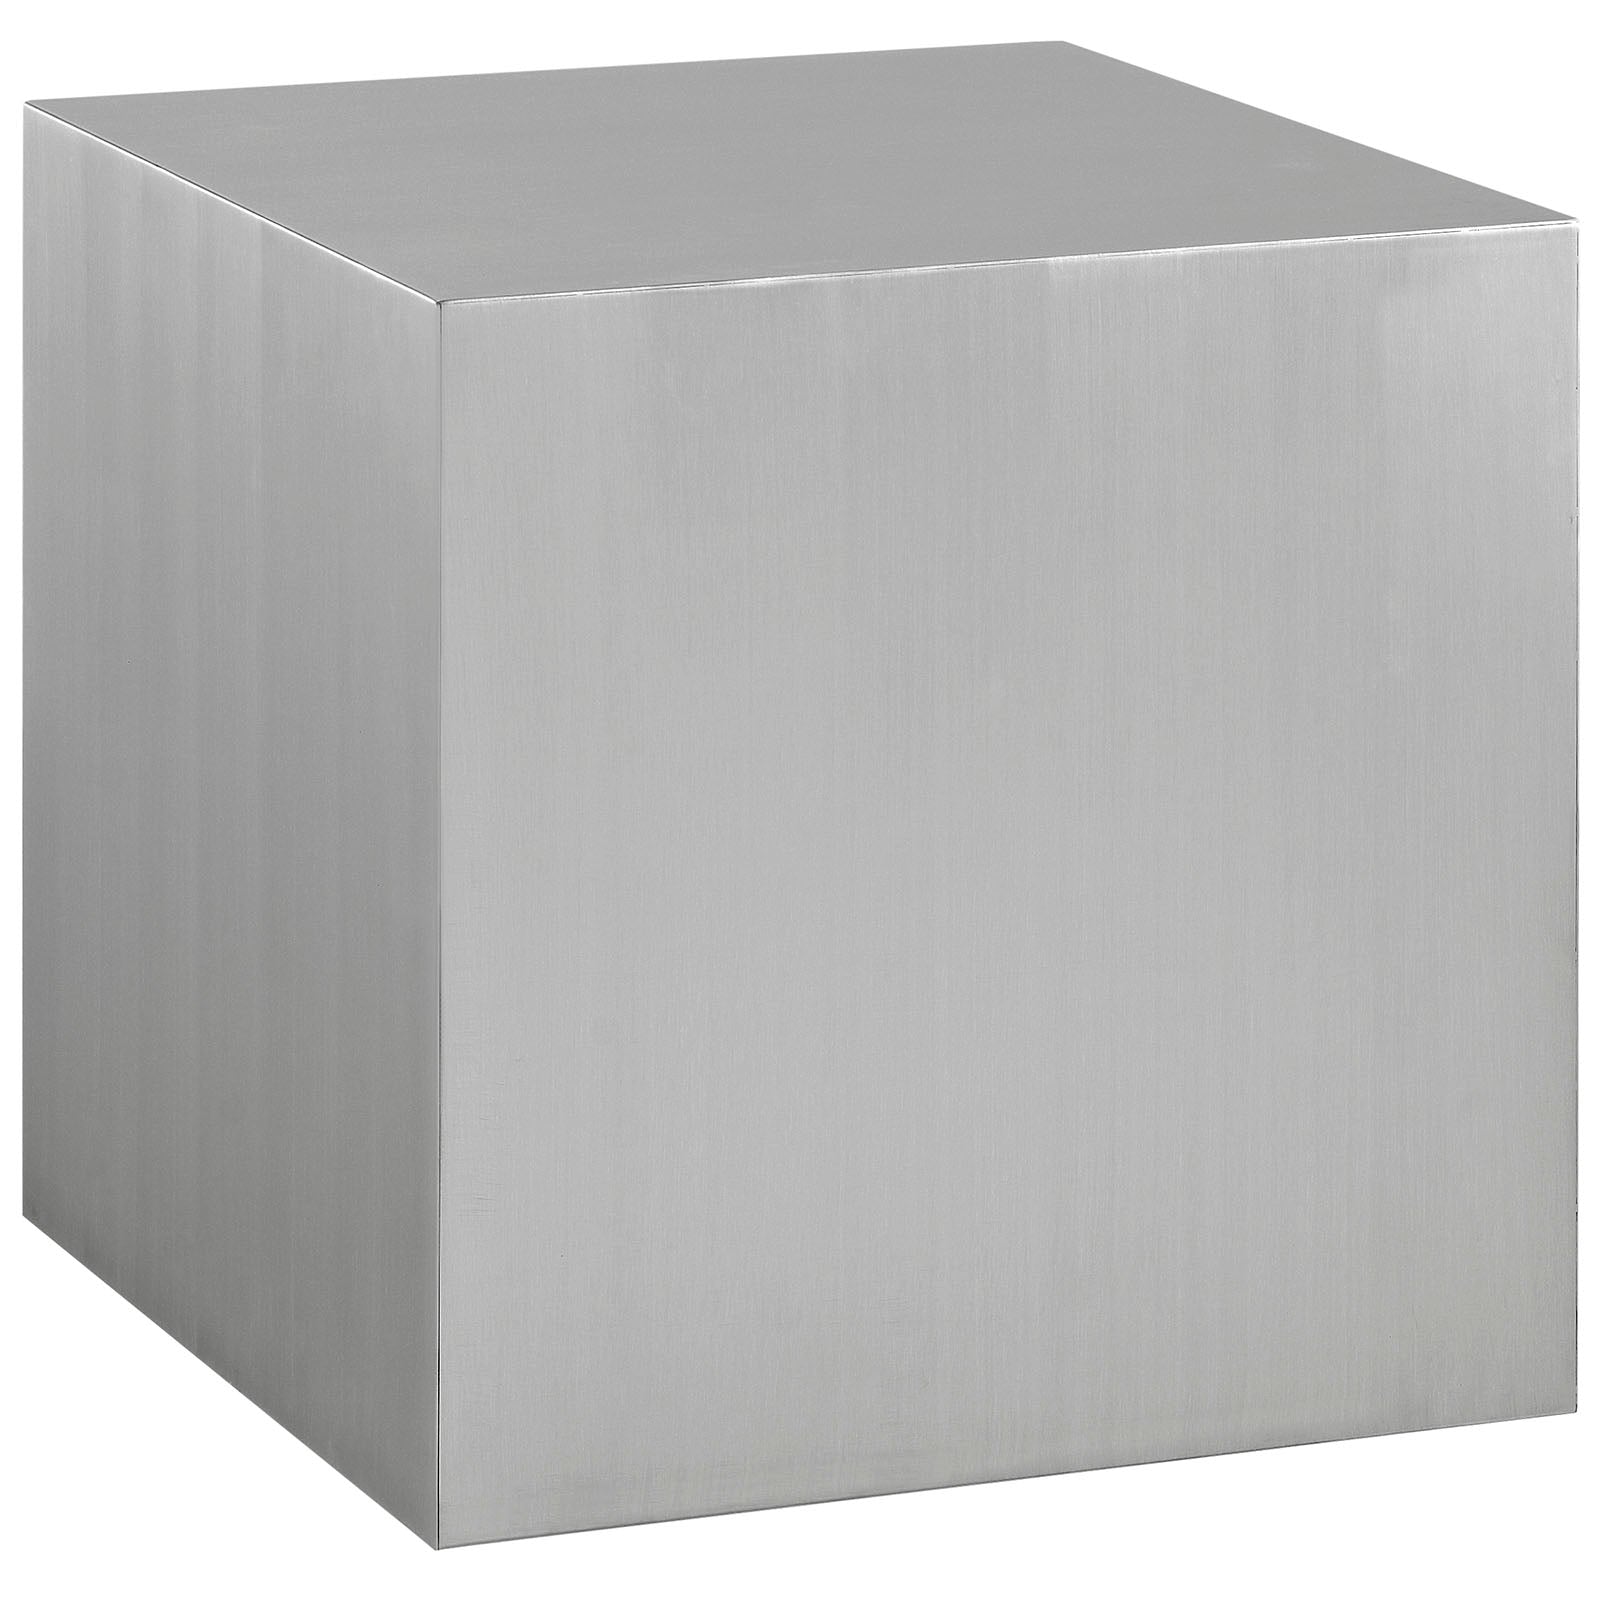 Cast Stainless Steel Side Table - East Shore Modern Home Furnishings